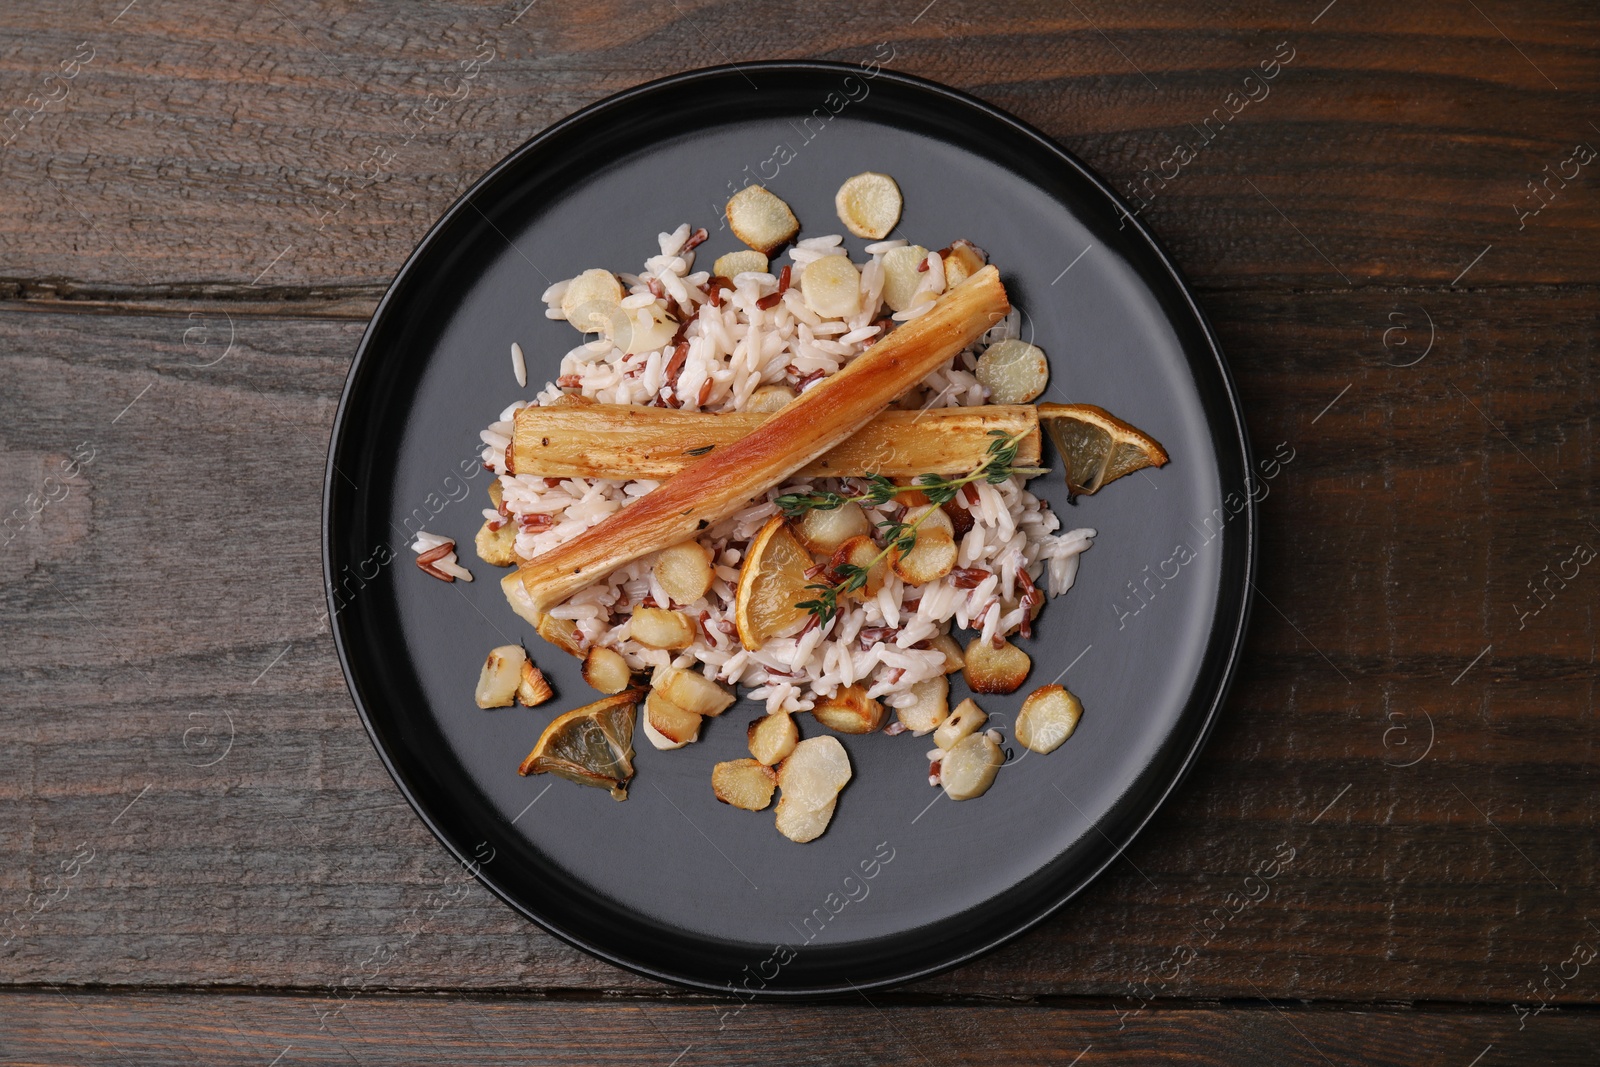 Photo of Plate with baked salsify roots, lemon and rice on wooden table, top view